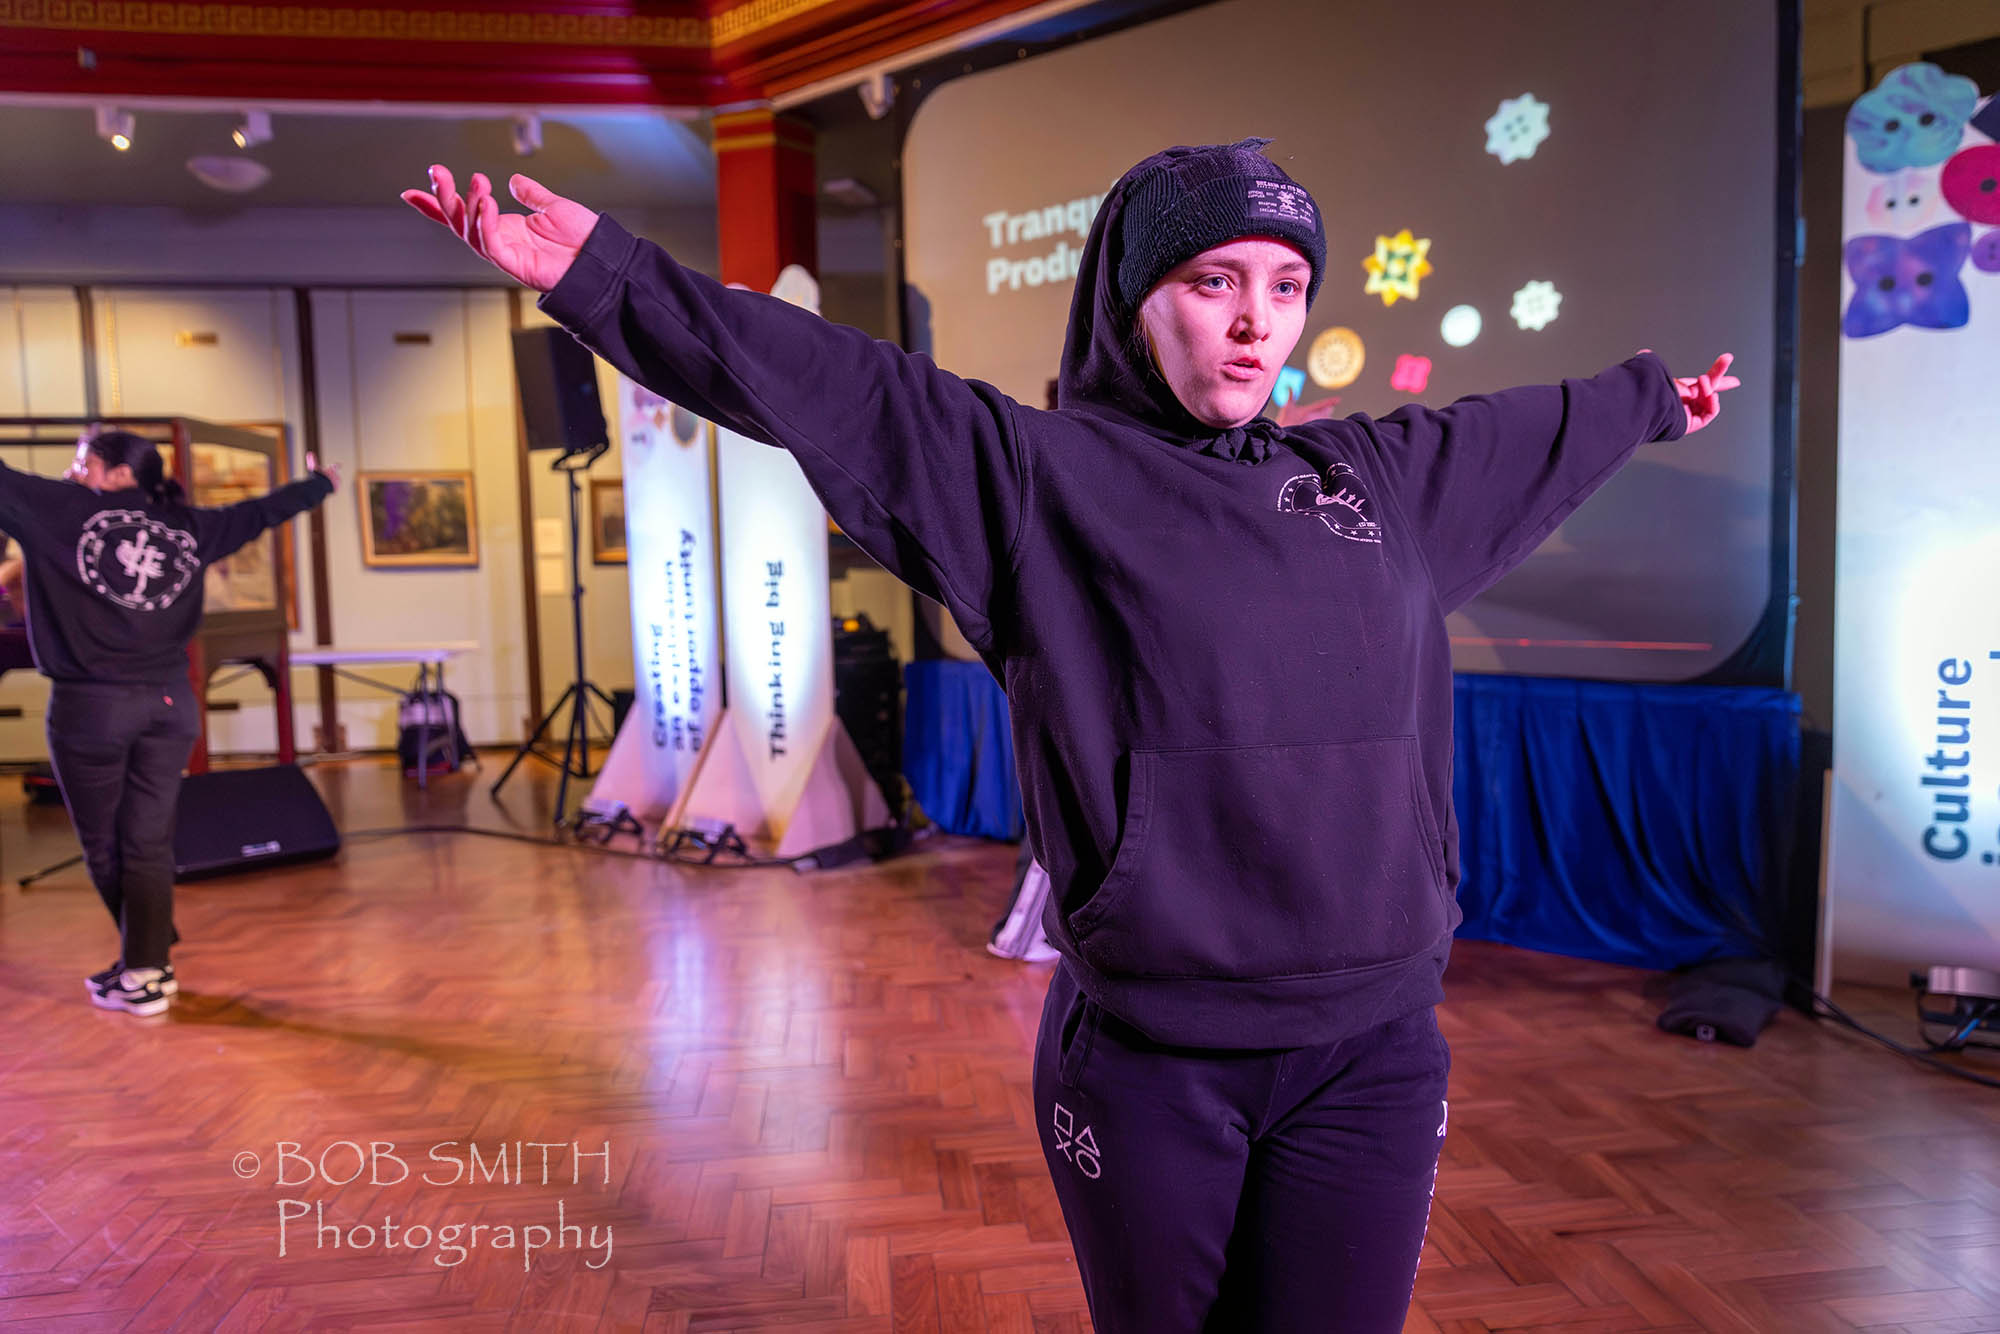 Breakdancers from Tranquil Productions perform at the Culture is Our Plan presentations at Cliffe Castle, Keighley. Photo: Bob Smith Photography